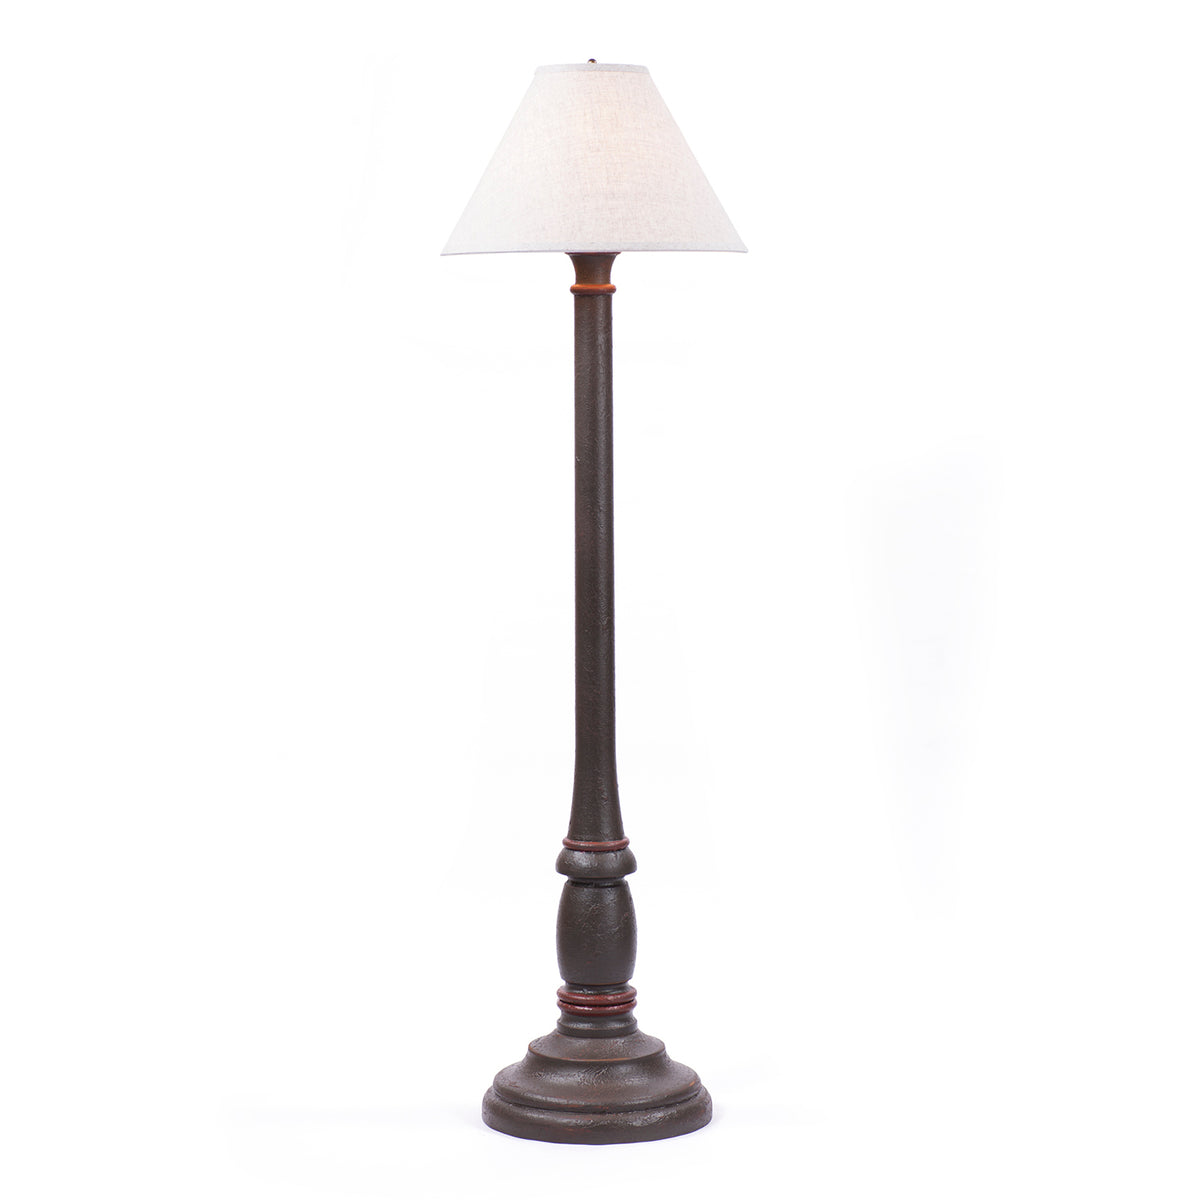 Brinton House Floor Lamp in Espresso with Linen Ivory Shade